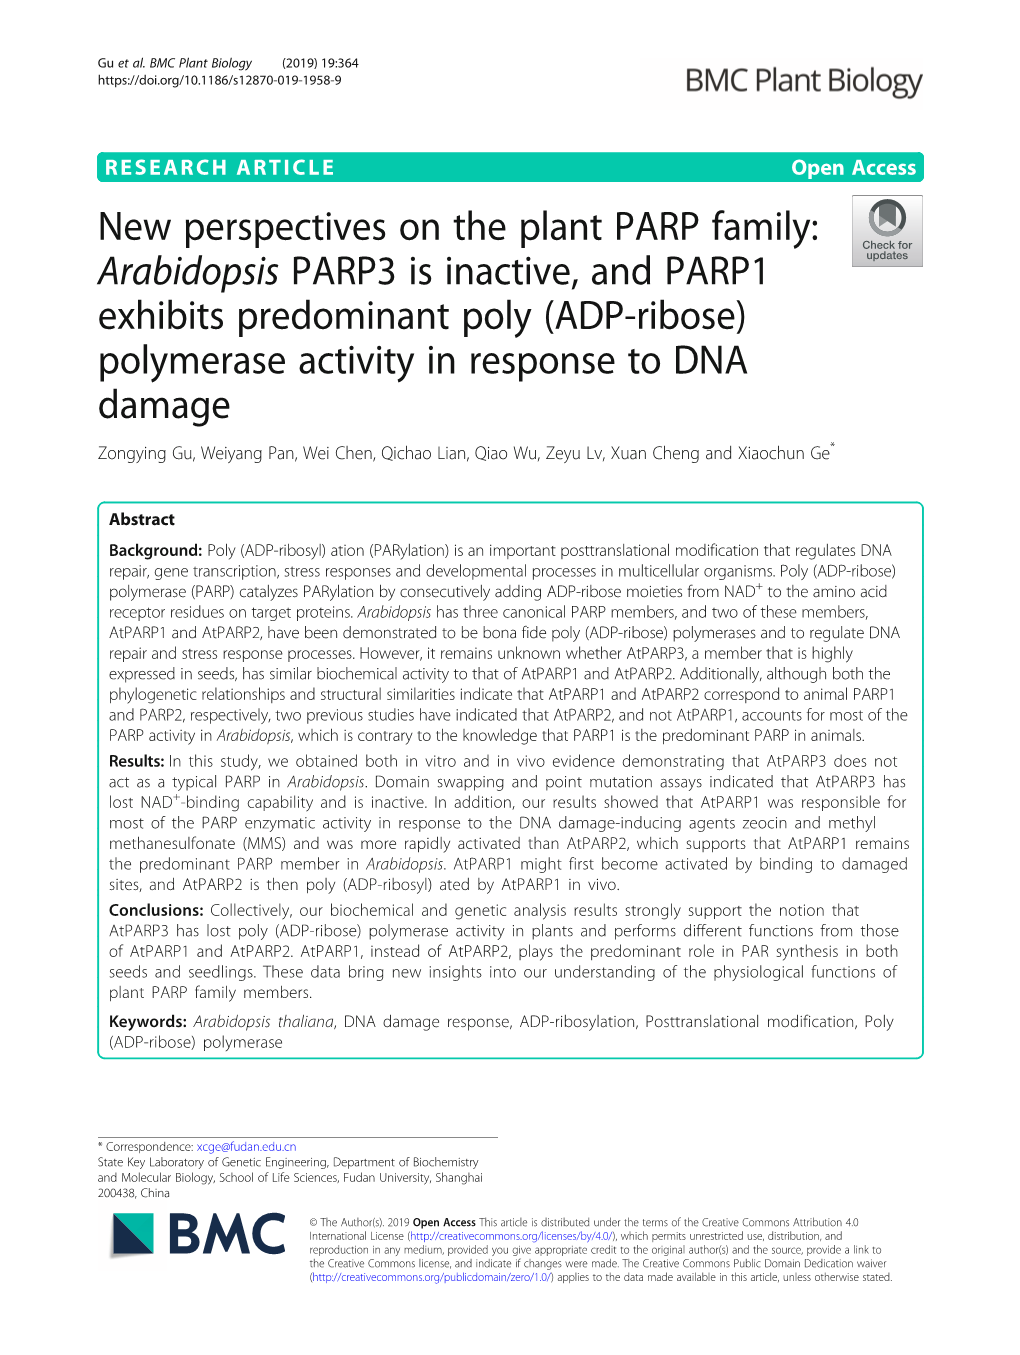 New Perspectives on the Plant PARP Family: Arabidopsis PARP3 Is